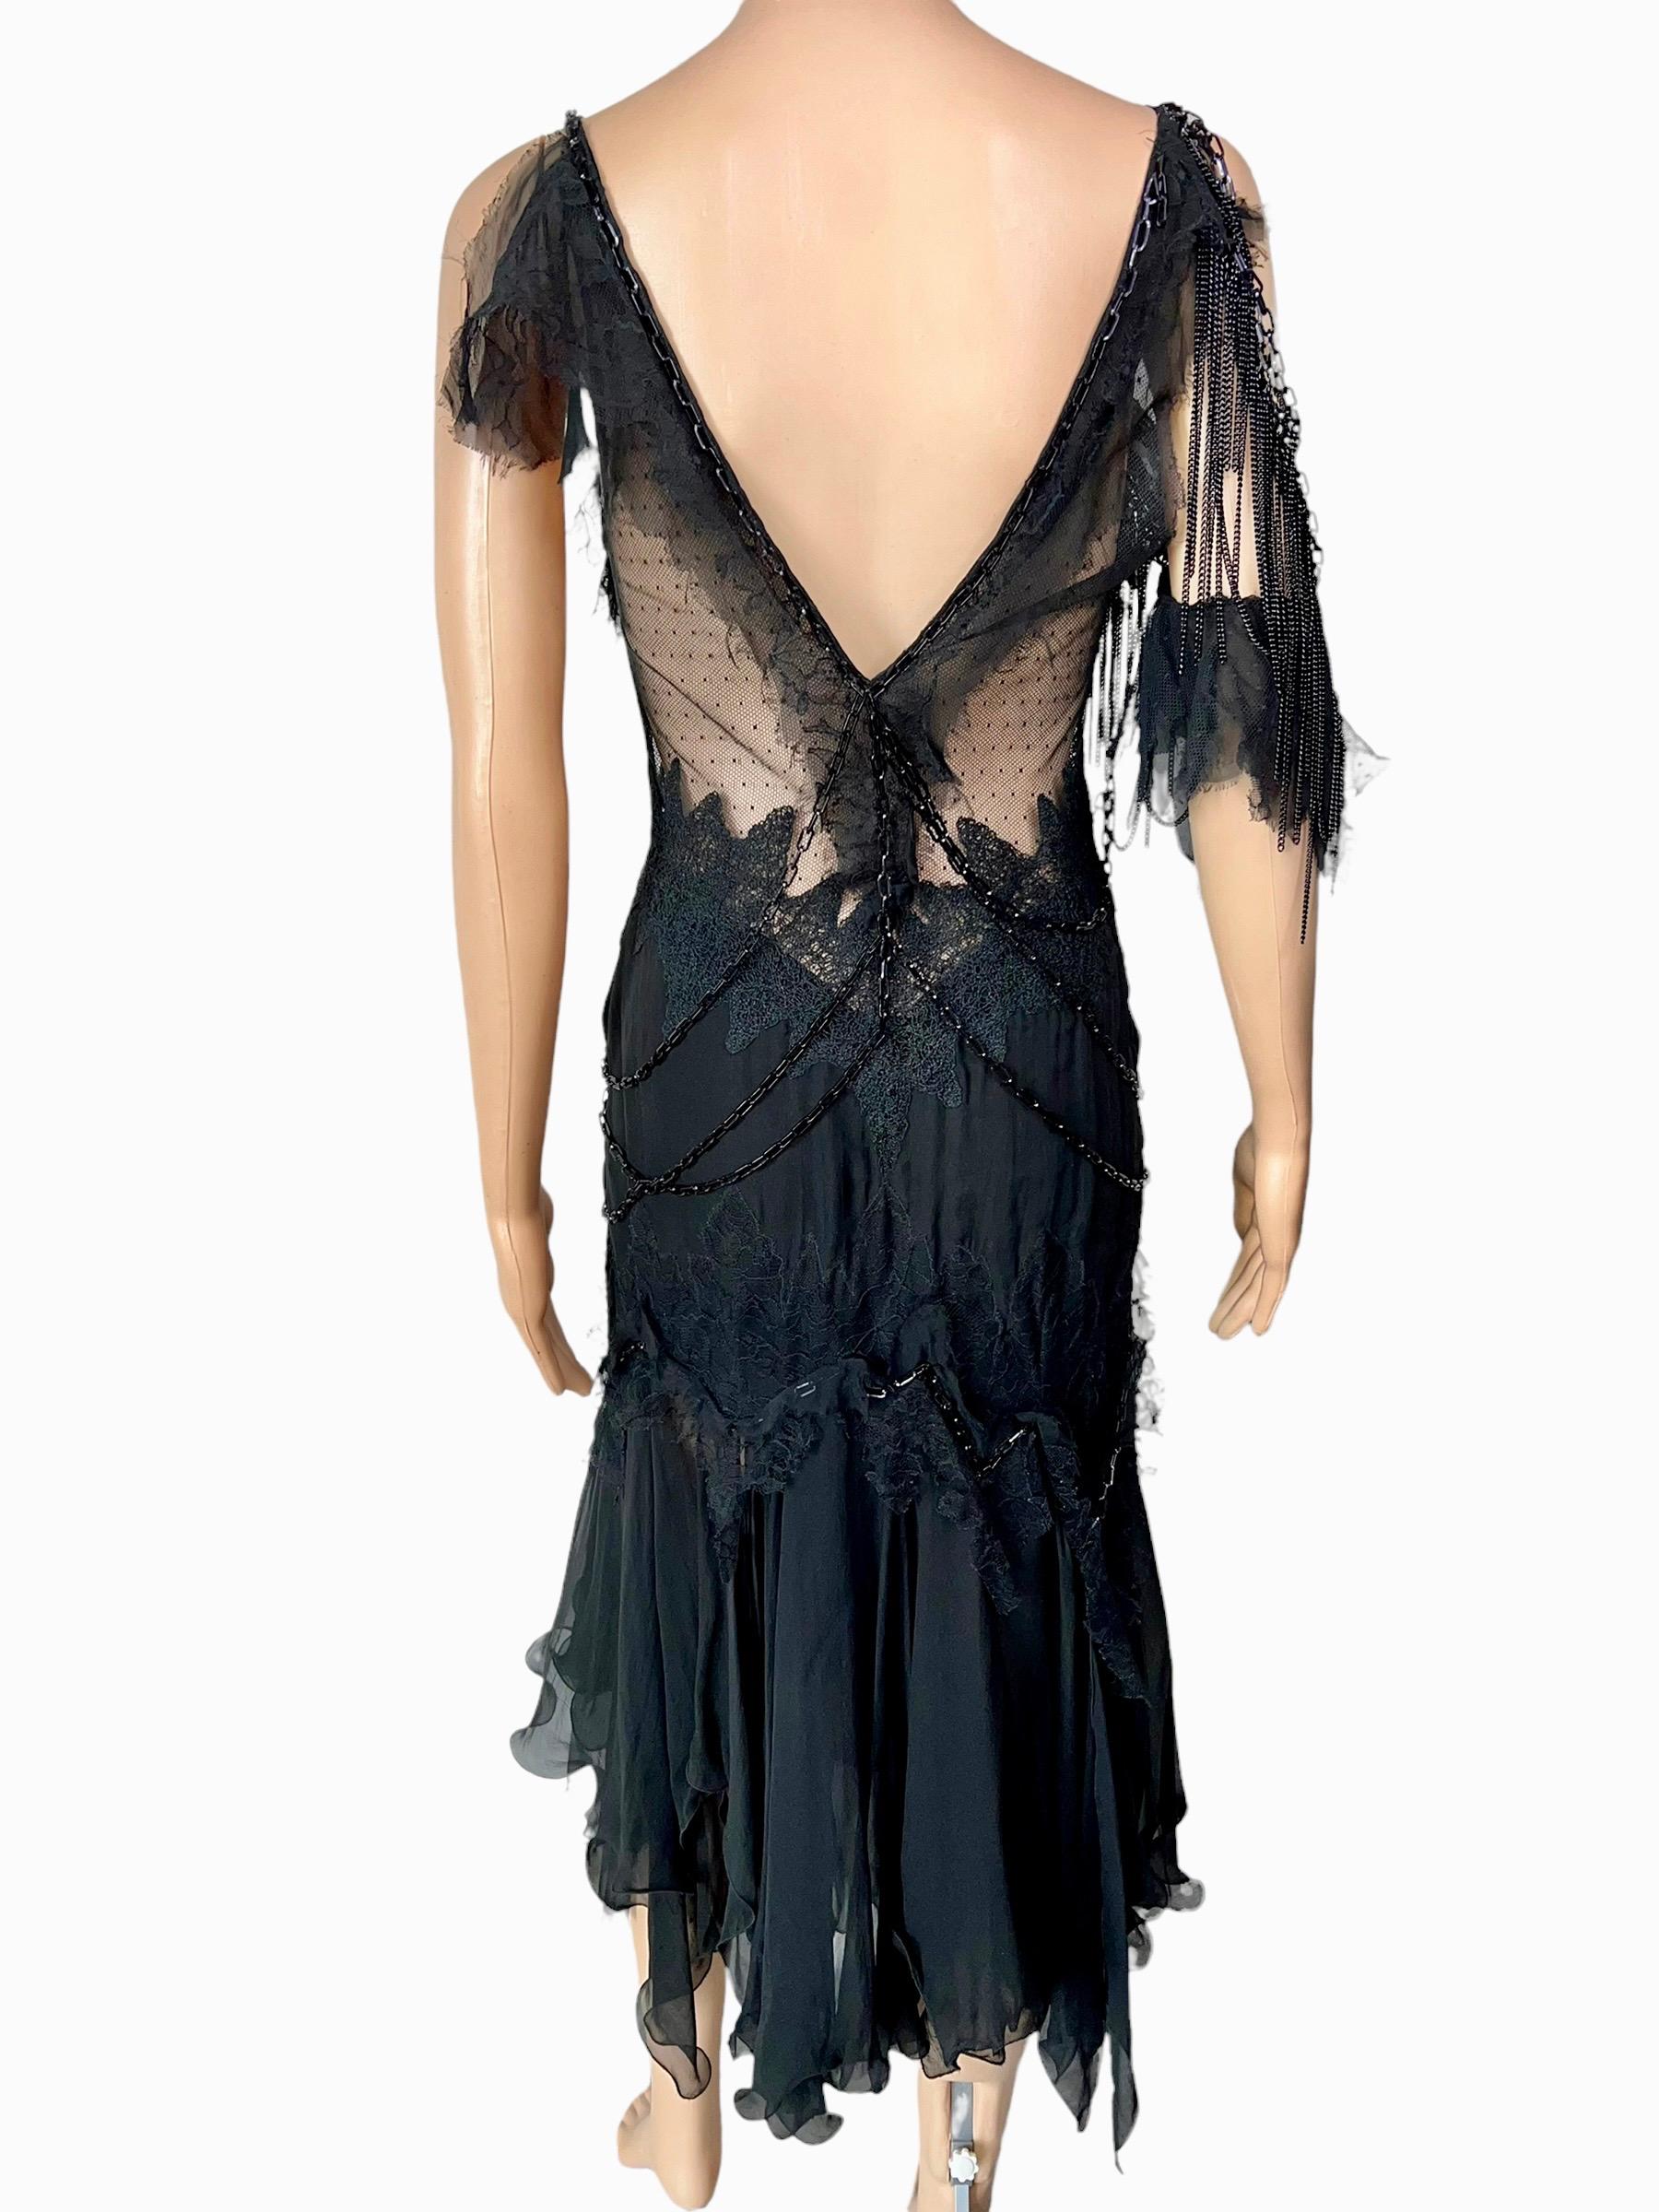 Versace F/W 2003 Runway Chain Embellished Sheer Lace Open Back Black Dress For Sale 5